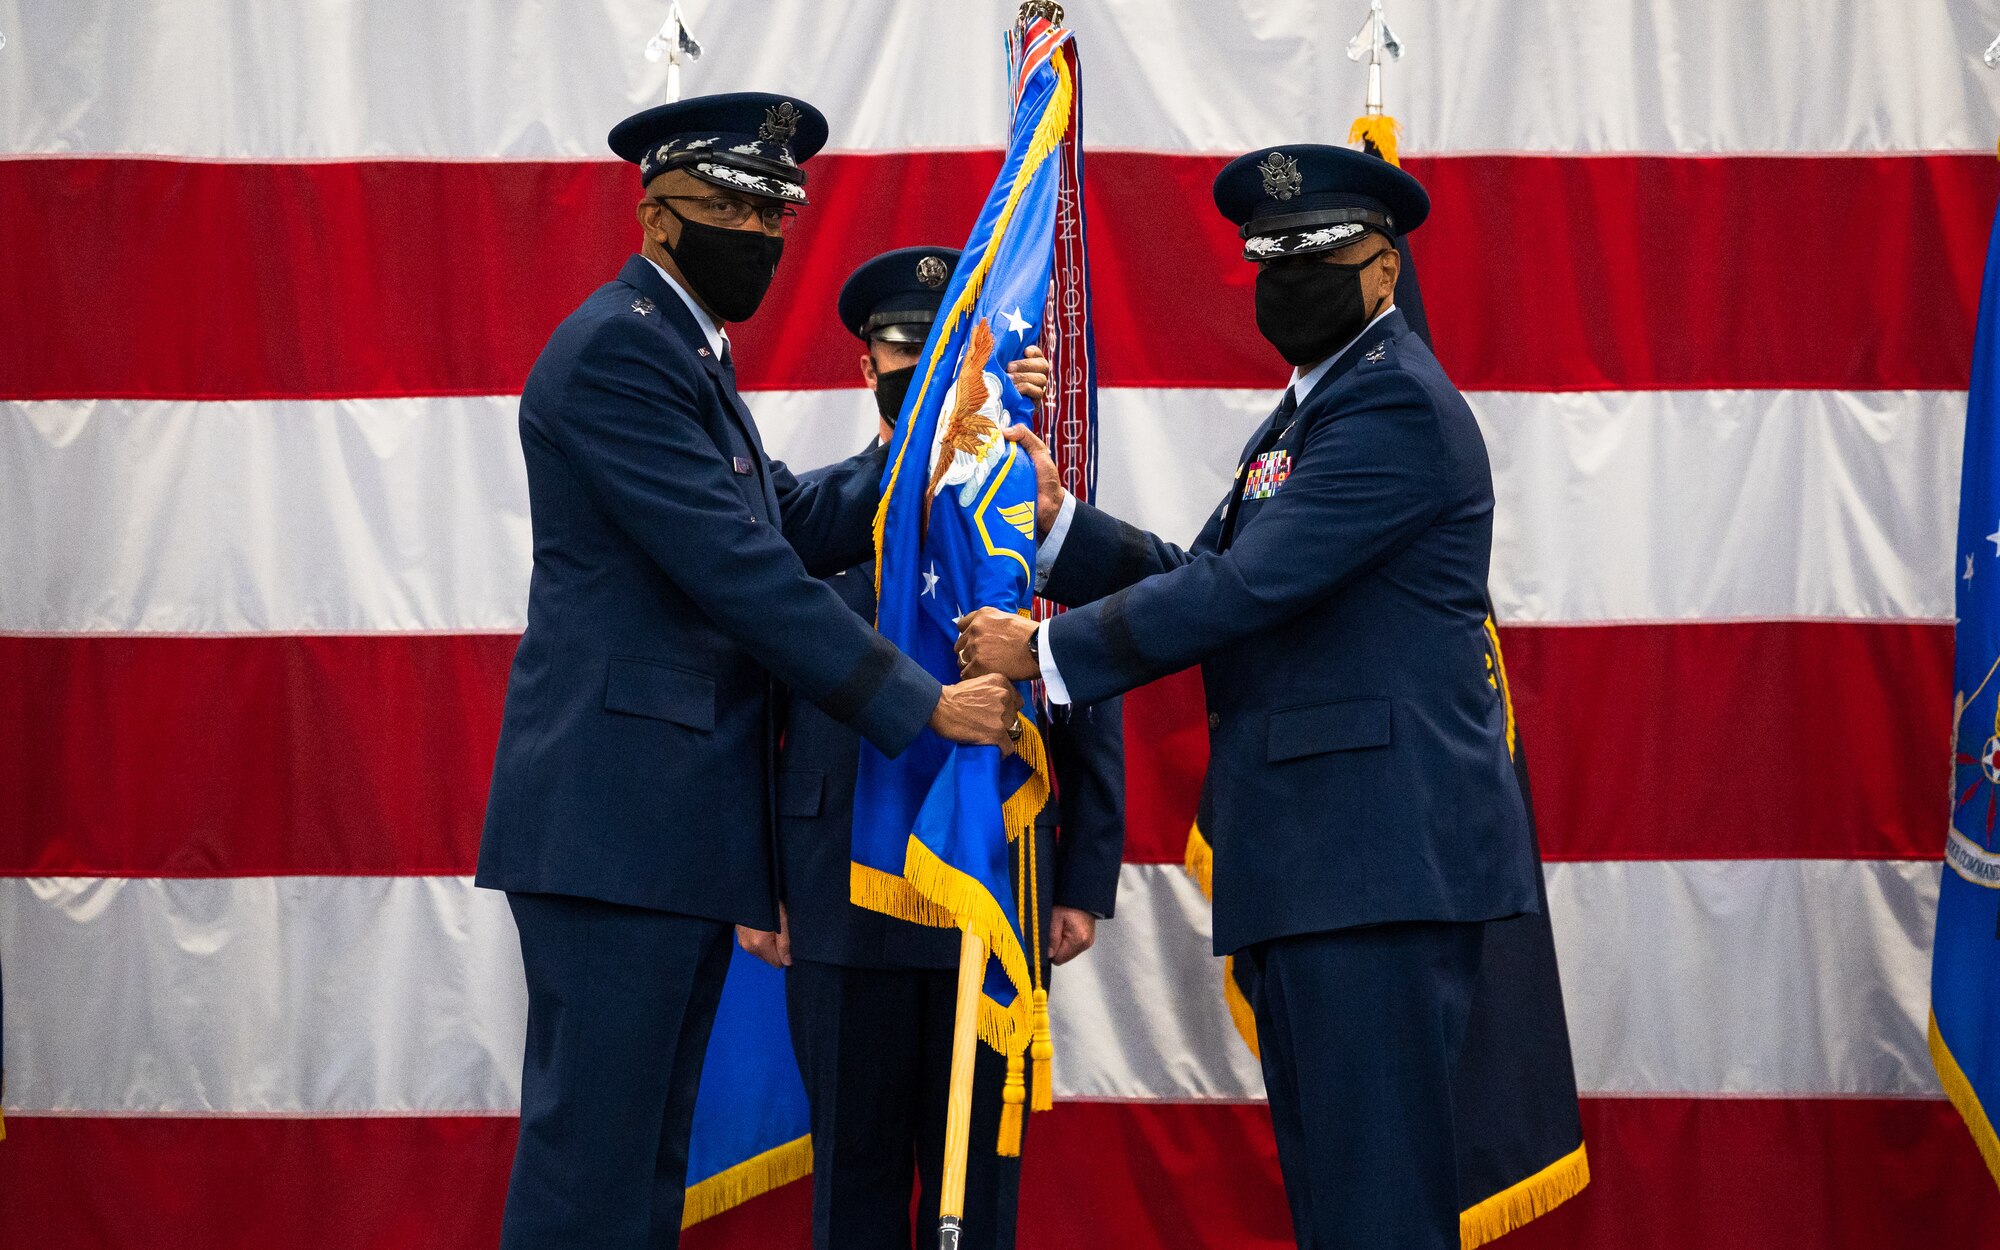 Gen. Anthony Cotton, right, incoming Air Force Global Strike Command commander, receives the guidon from Air Force Chief of Staff Gen. CQ Brown, Jr., left, during the AFGSC change of command ceremony at Barksdale Air Force Base, Louisiana, Aug. 27, 2021. The passing of a unit’s guidon symbolizes a transfer of command. (U.S. Air Force photo by Senior Airman Jacob B. Wrightsman)